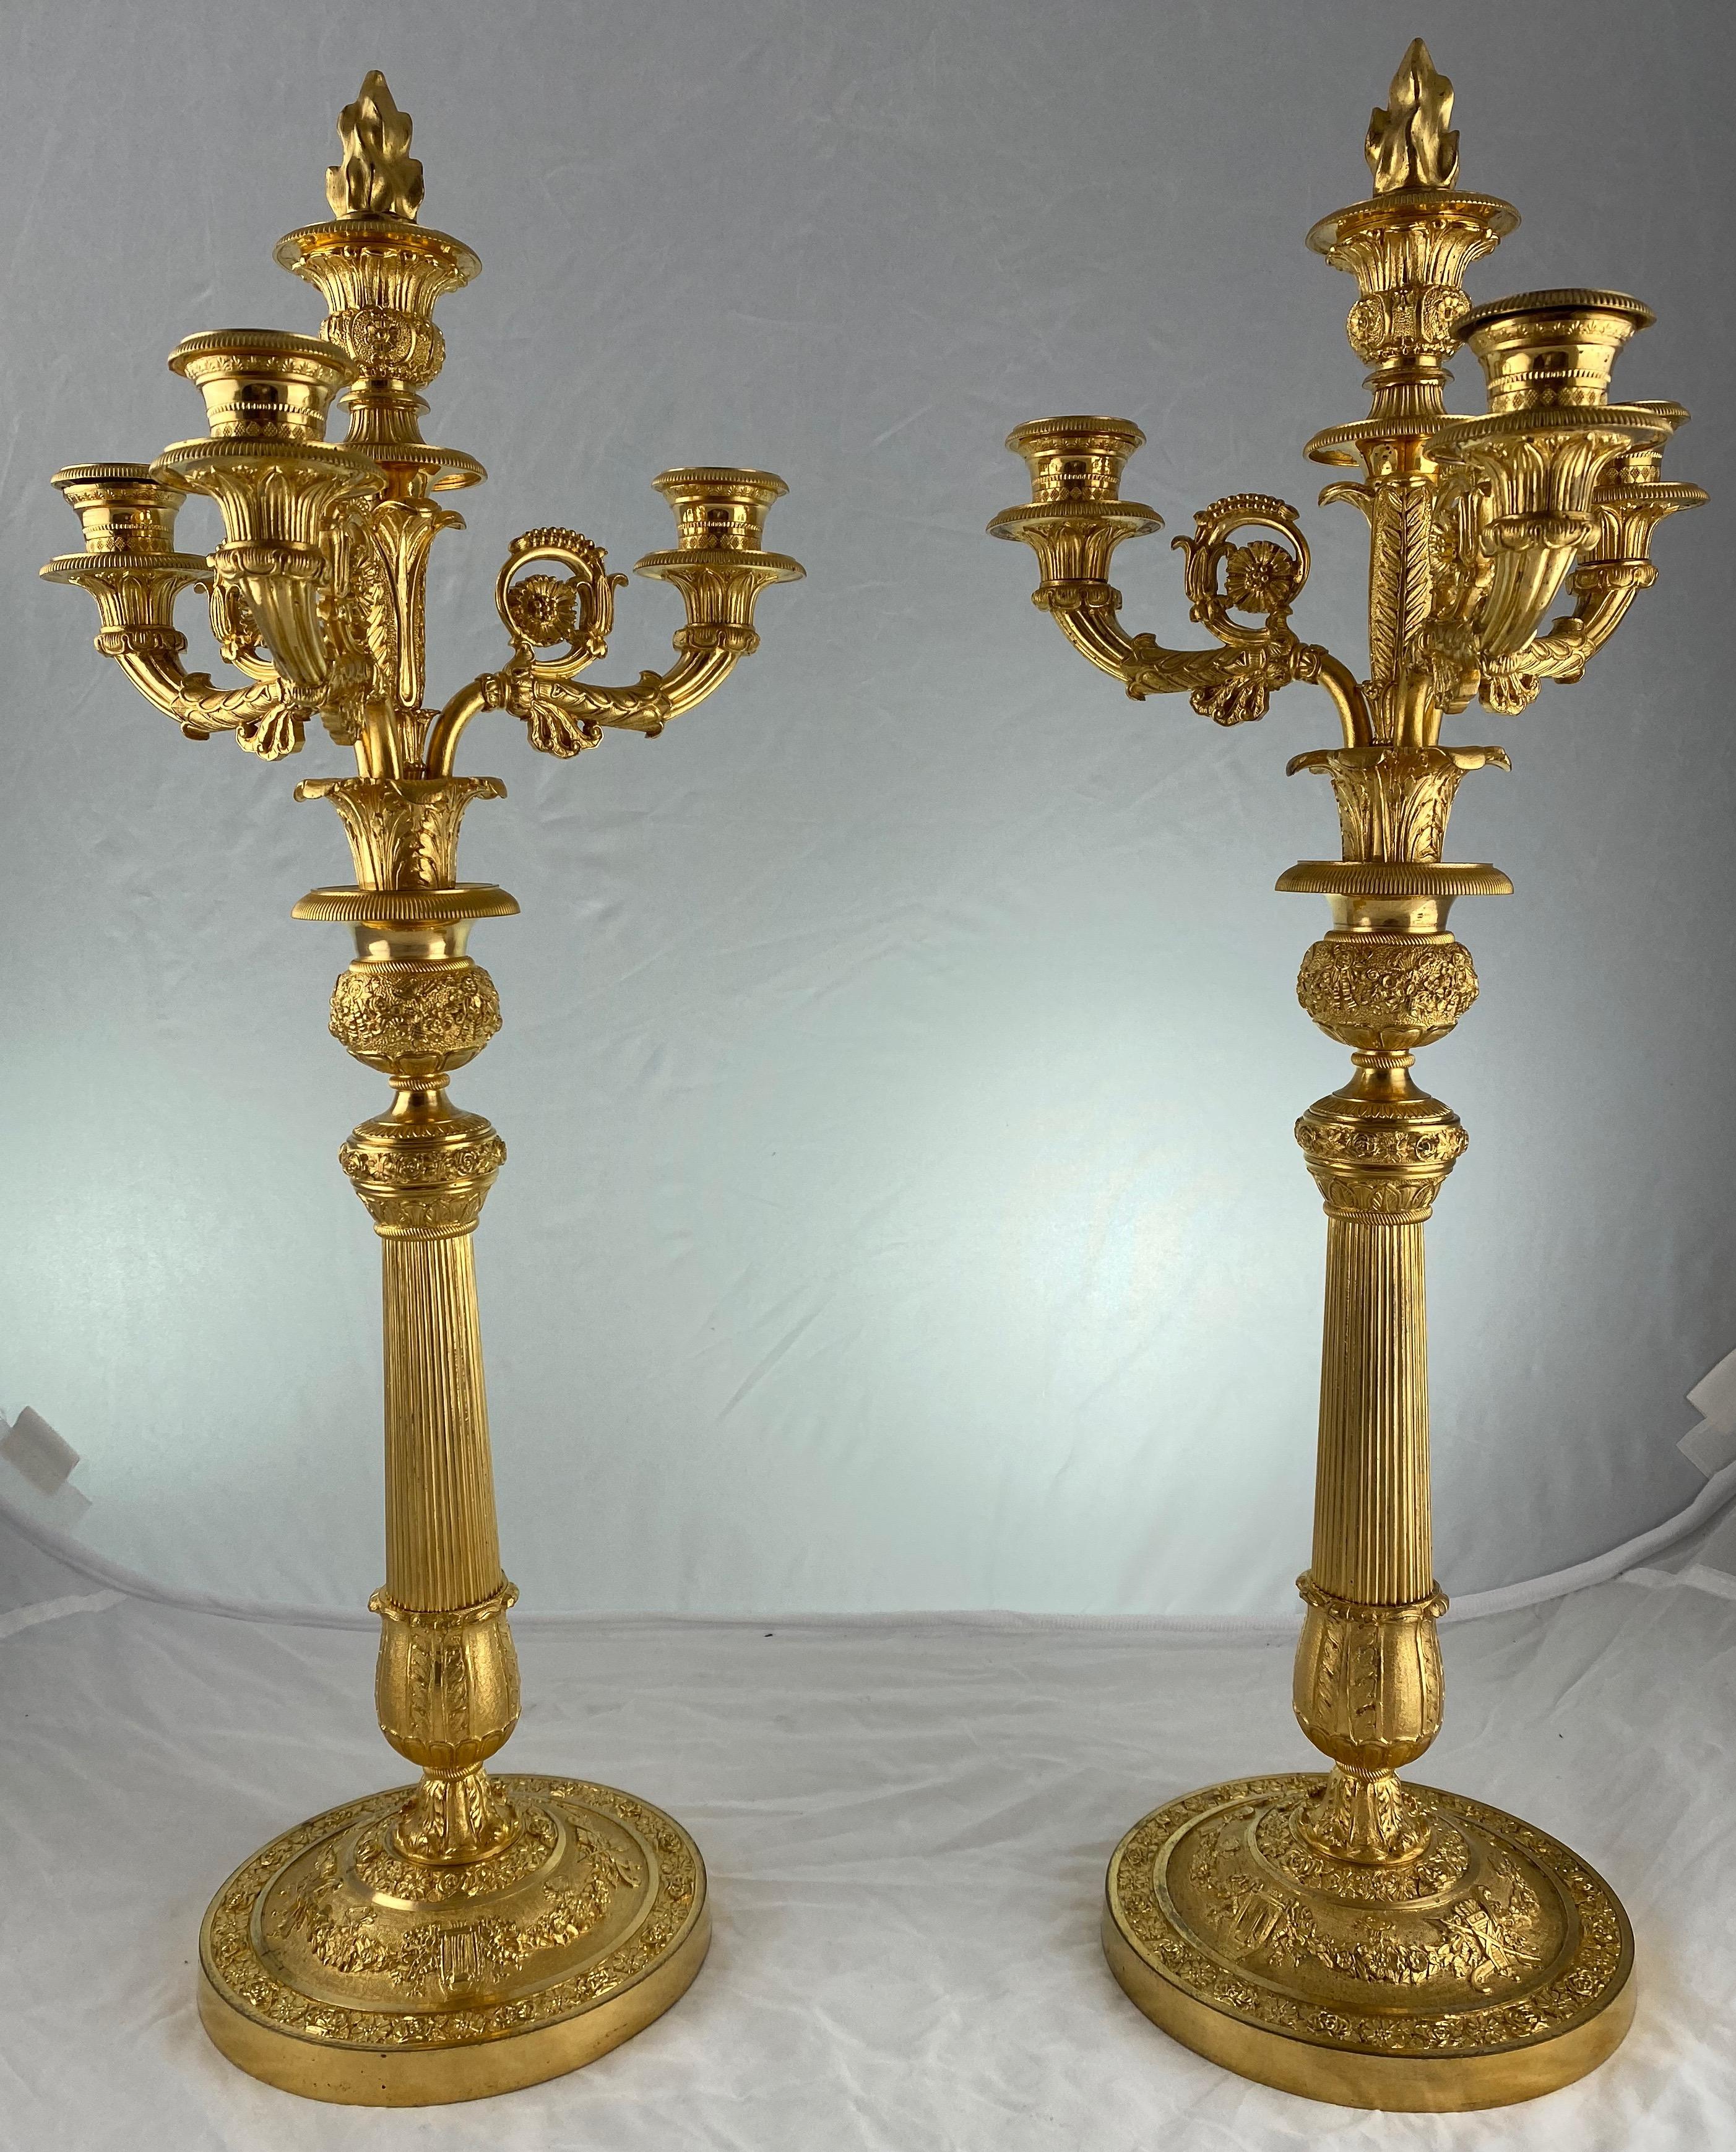 A pair of gilt bronze candelabra made around 1820-30. The candelabra have detachable candelabra-arms and can also be used as candlesticks.